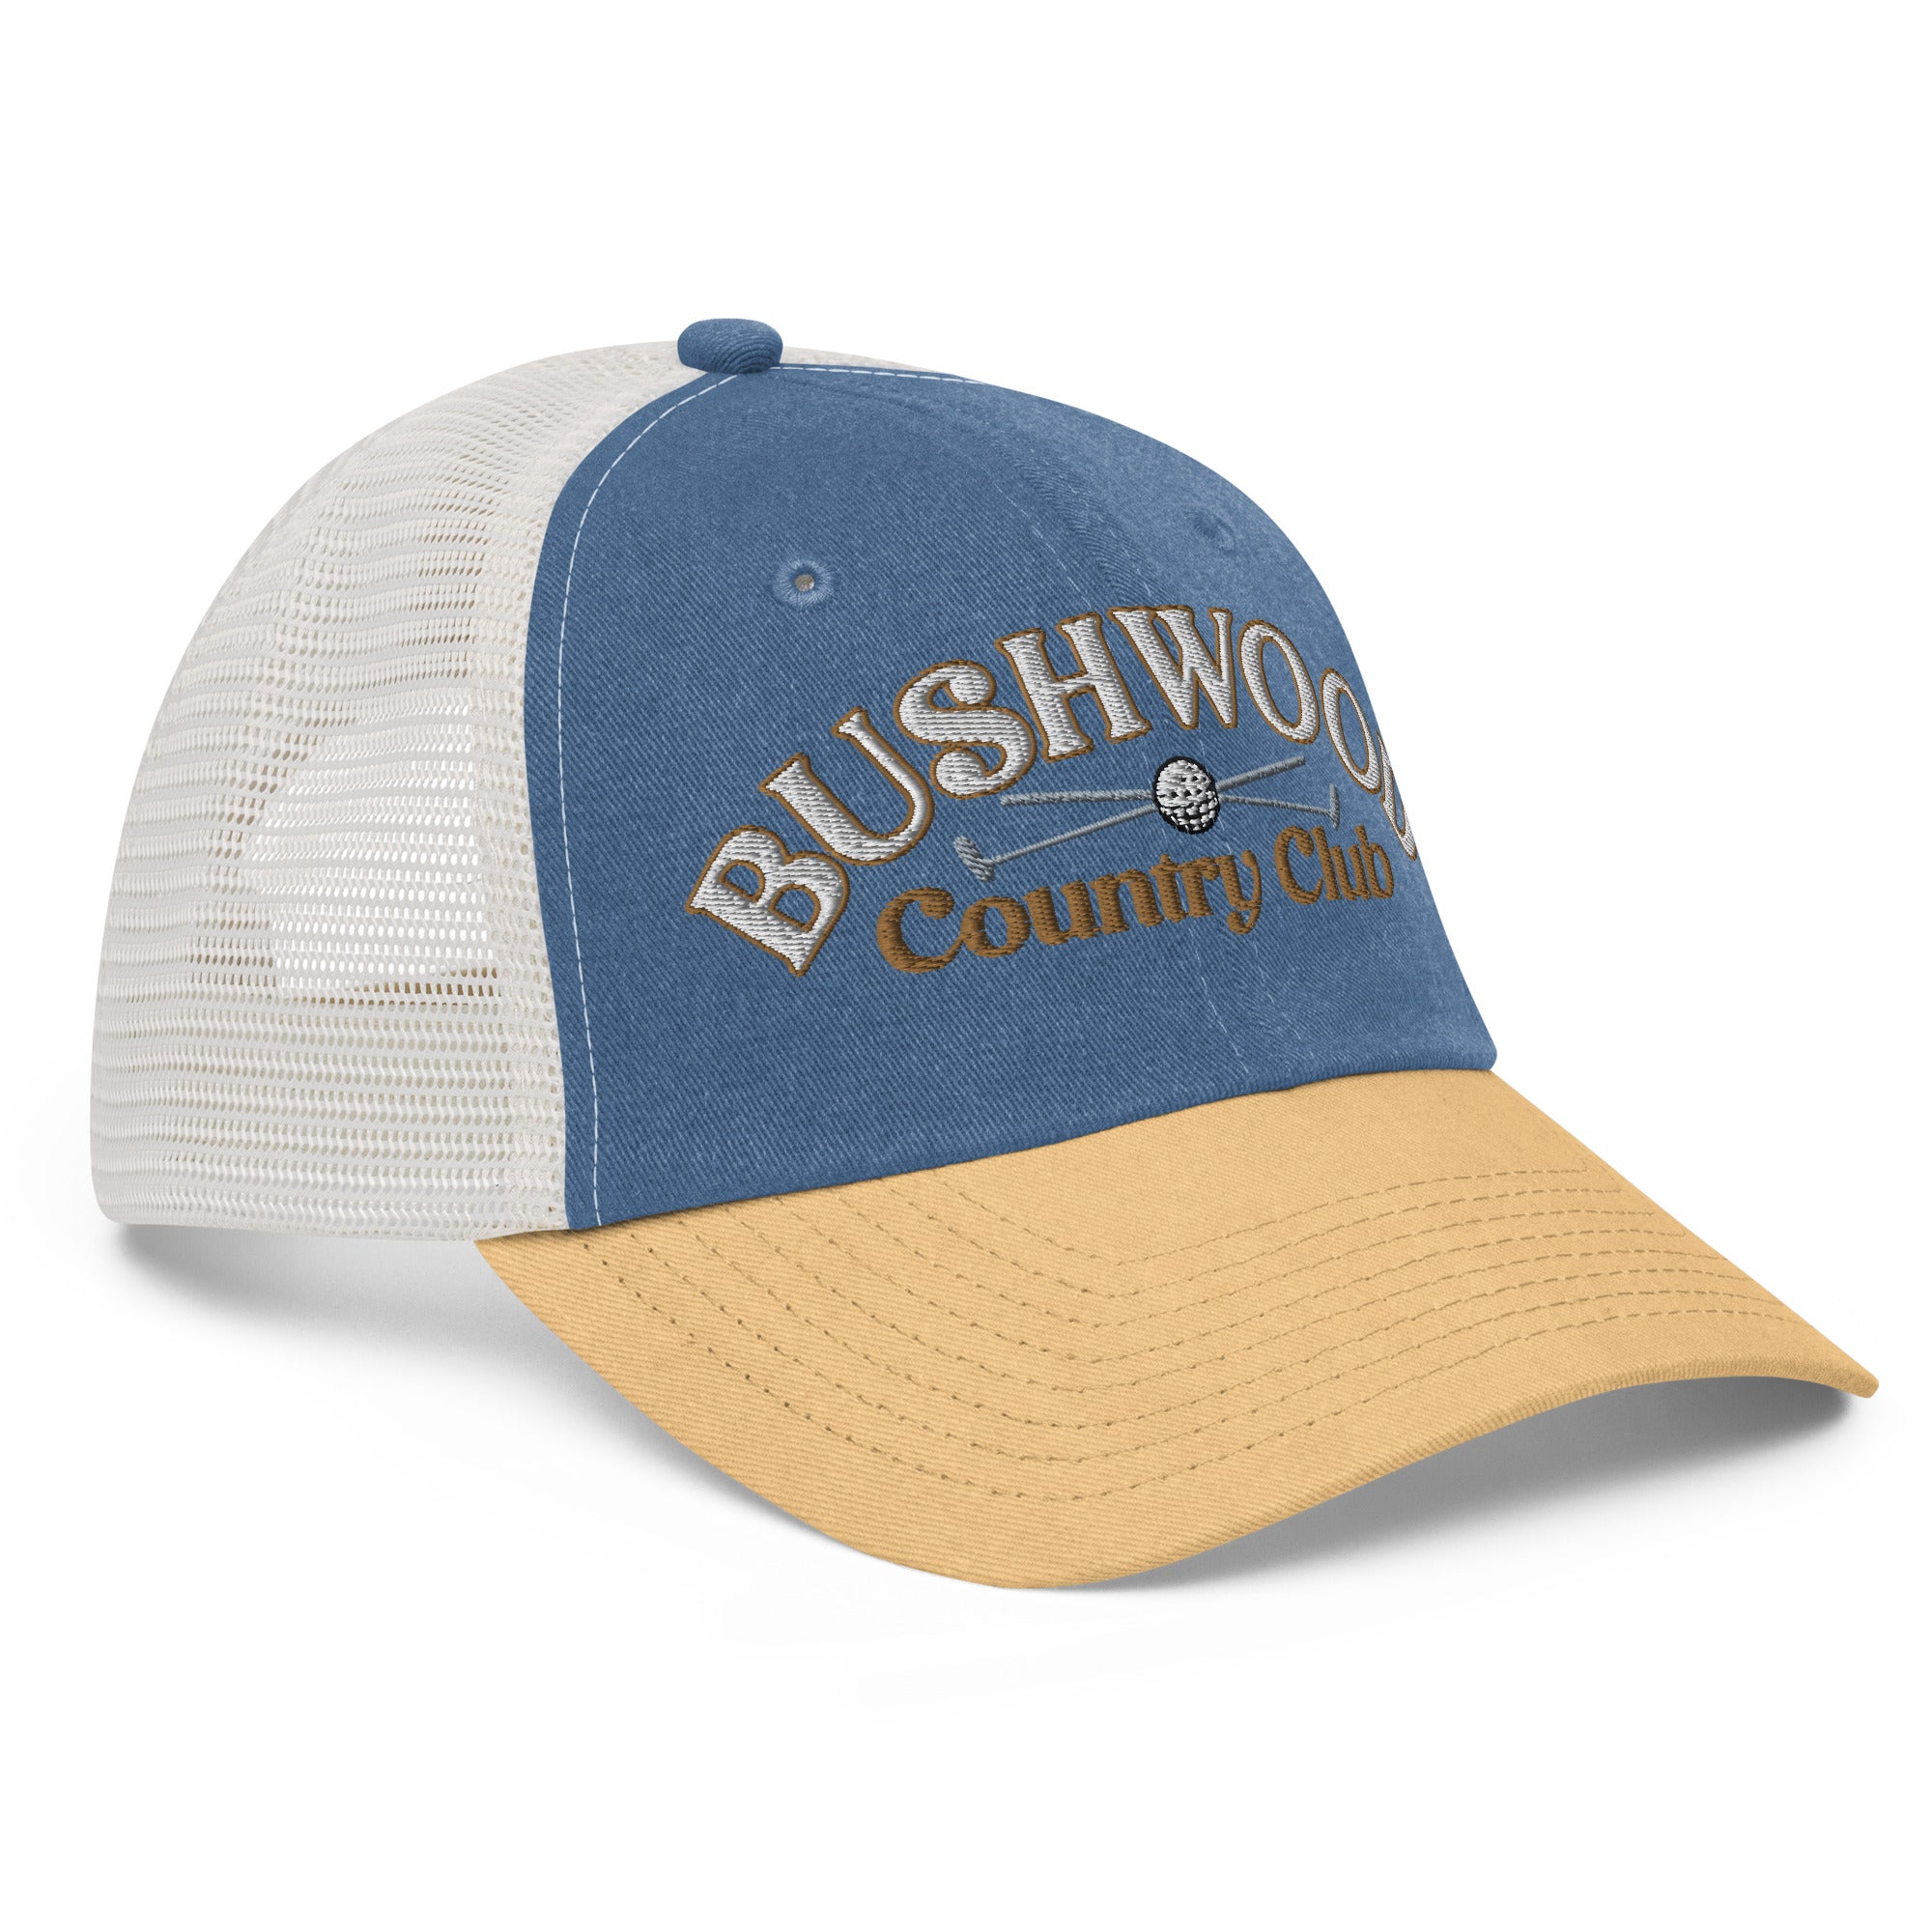 Bushwood Country Club Pigment-dyed Golf Hat